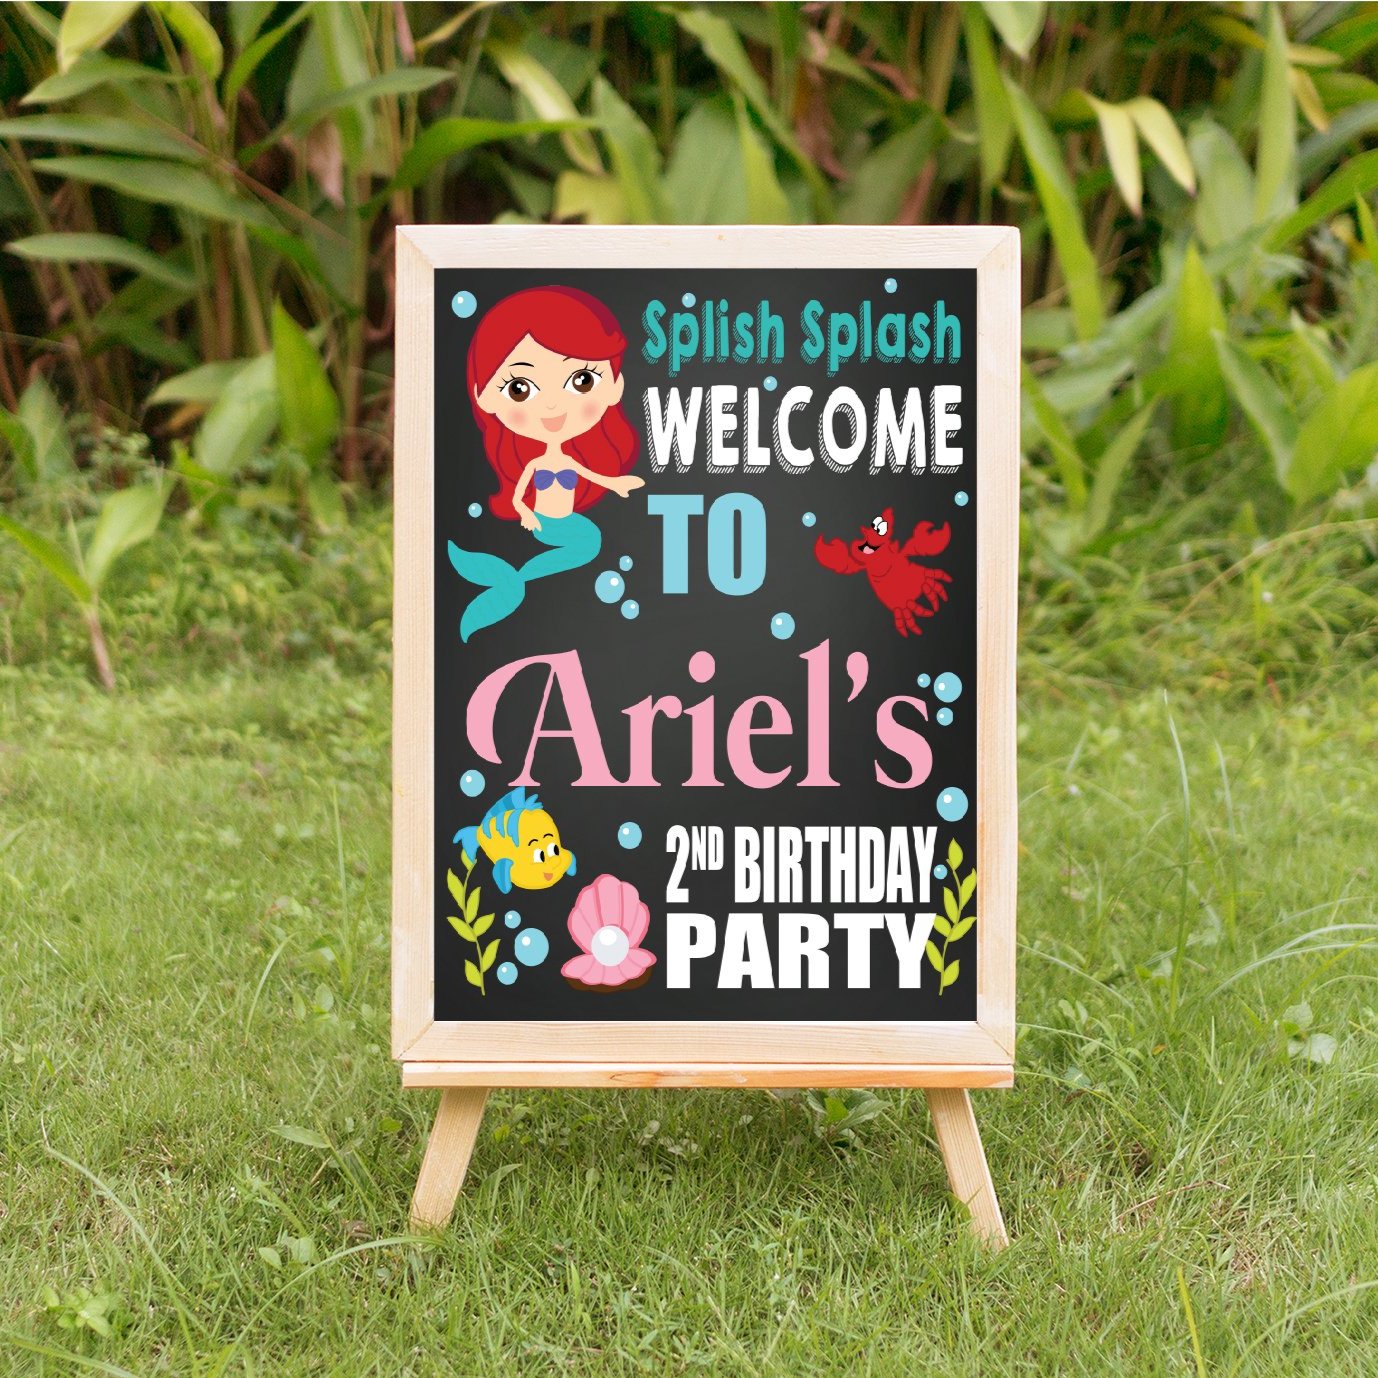 Little mermaid welcome birthday party signage